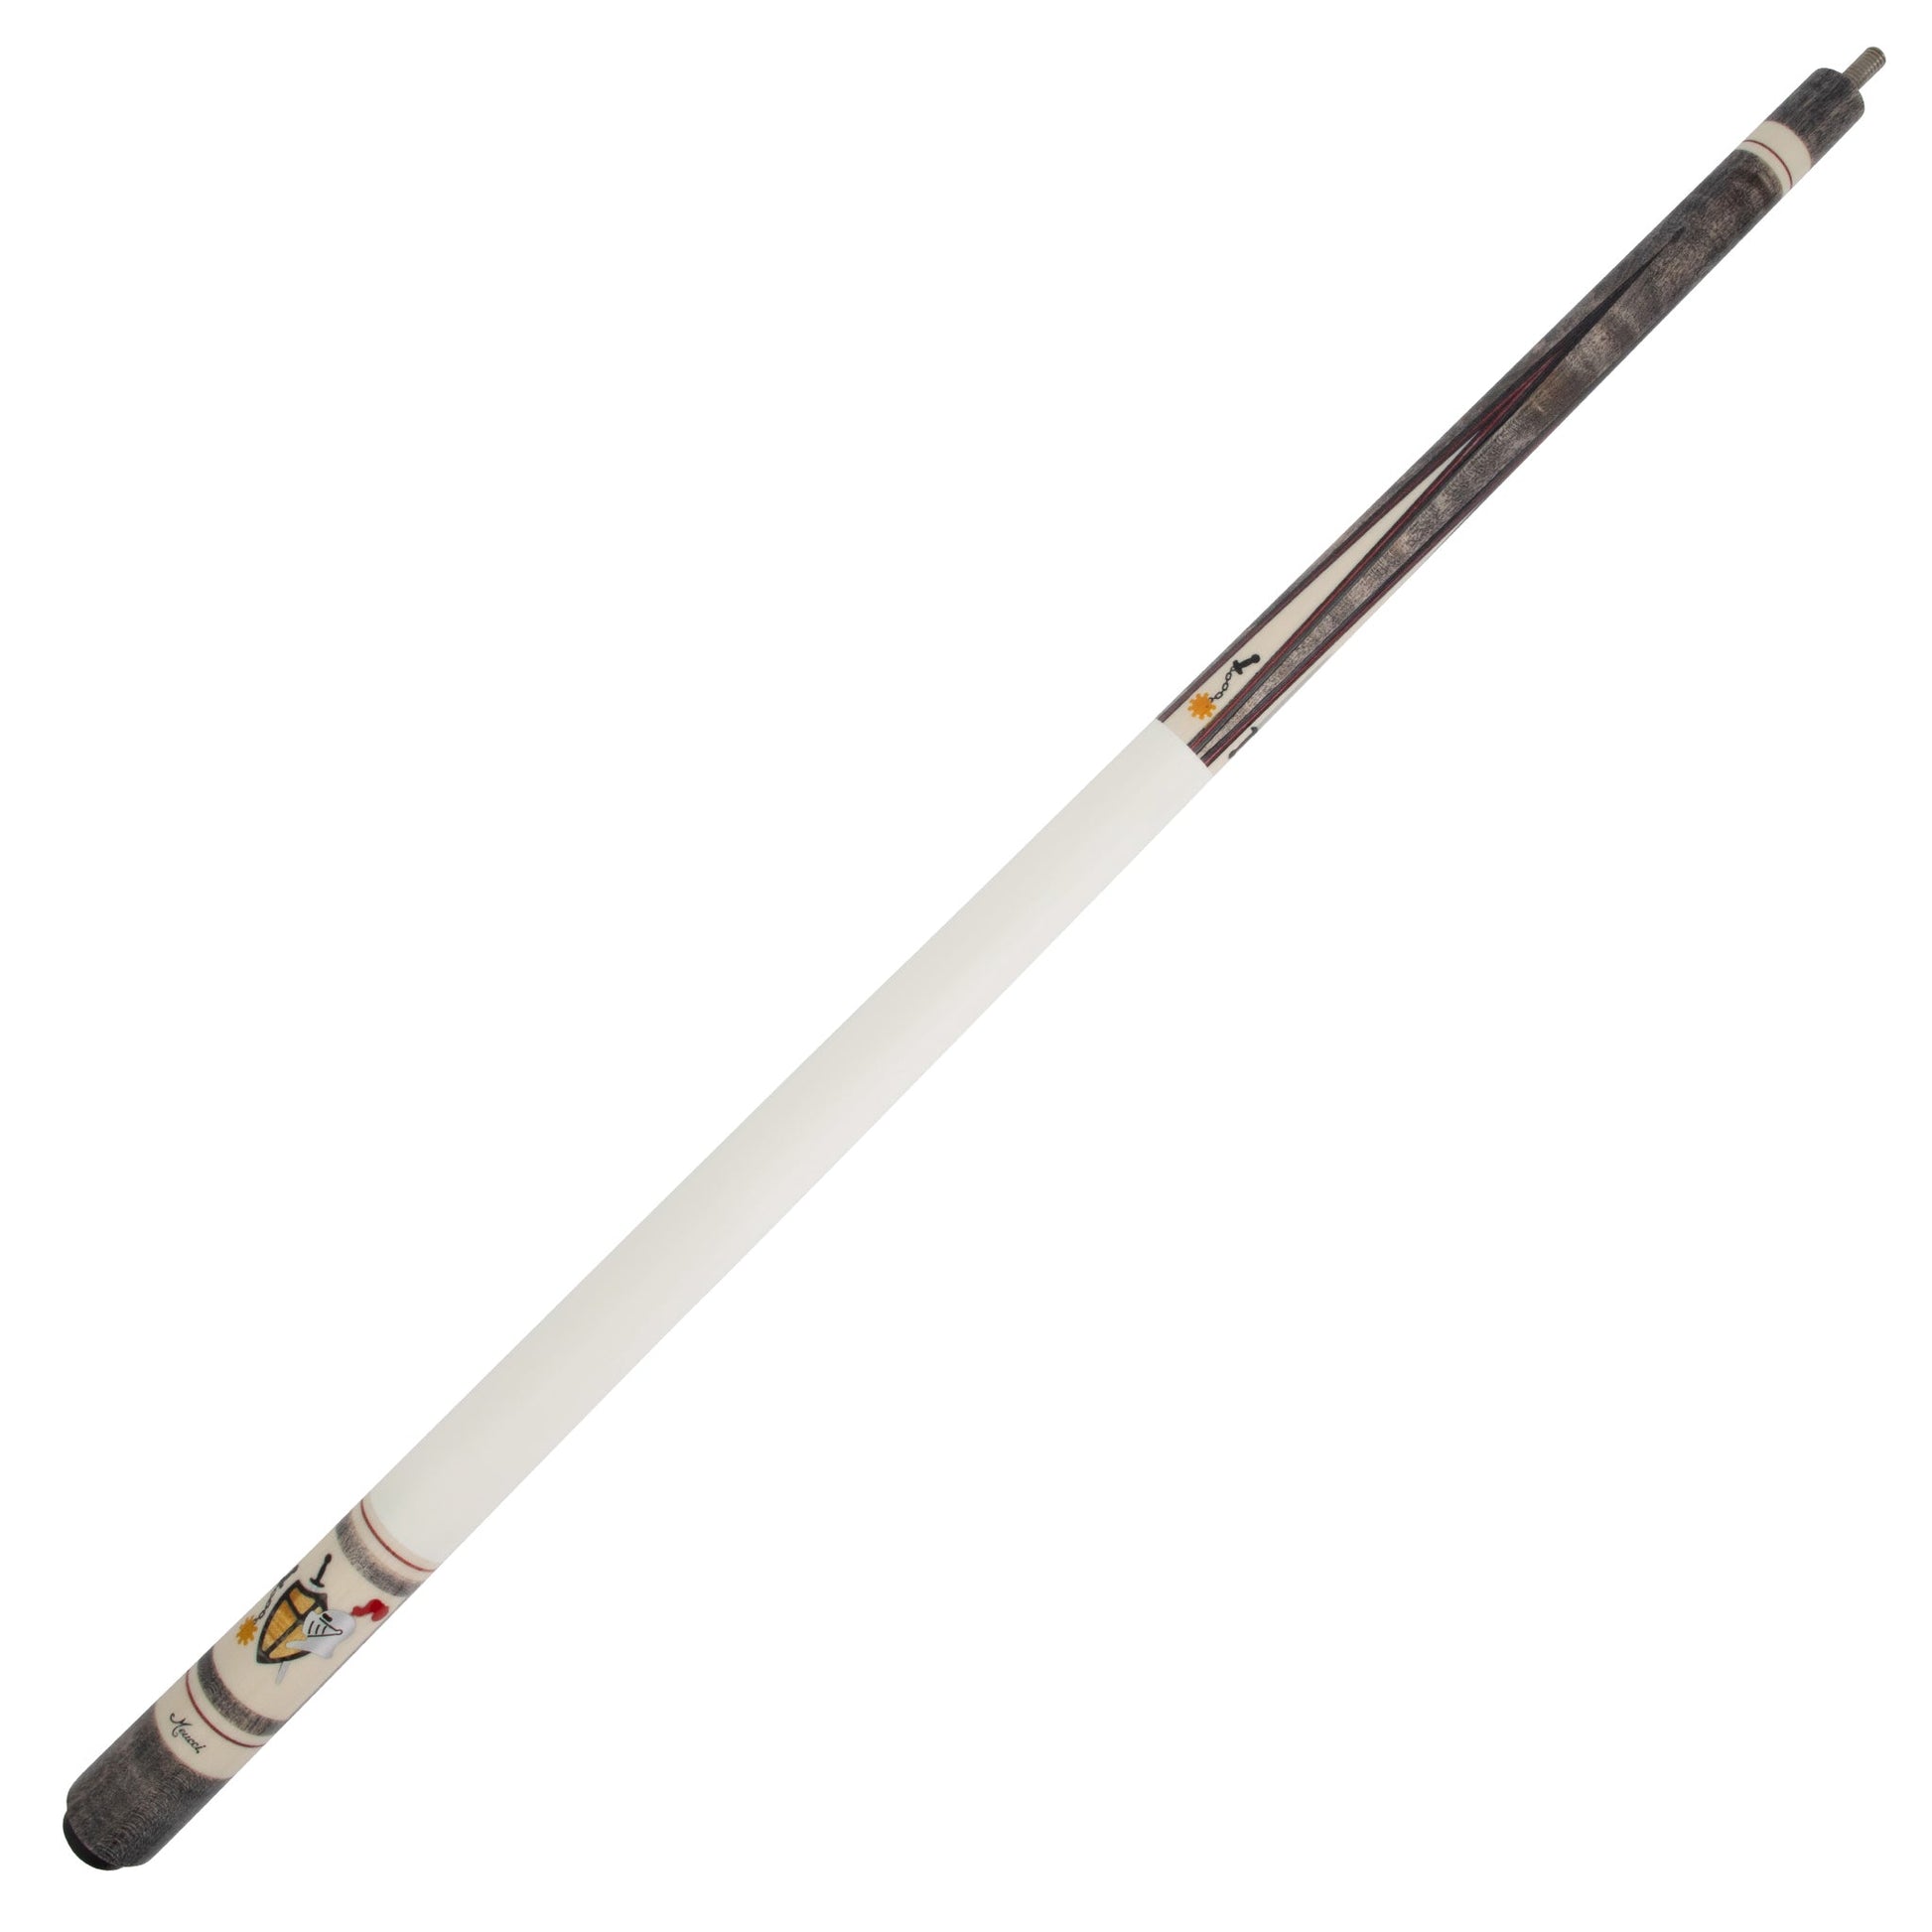 Hall of Fame 7 White Meucci Pool Cue Full